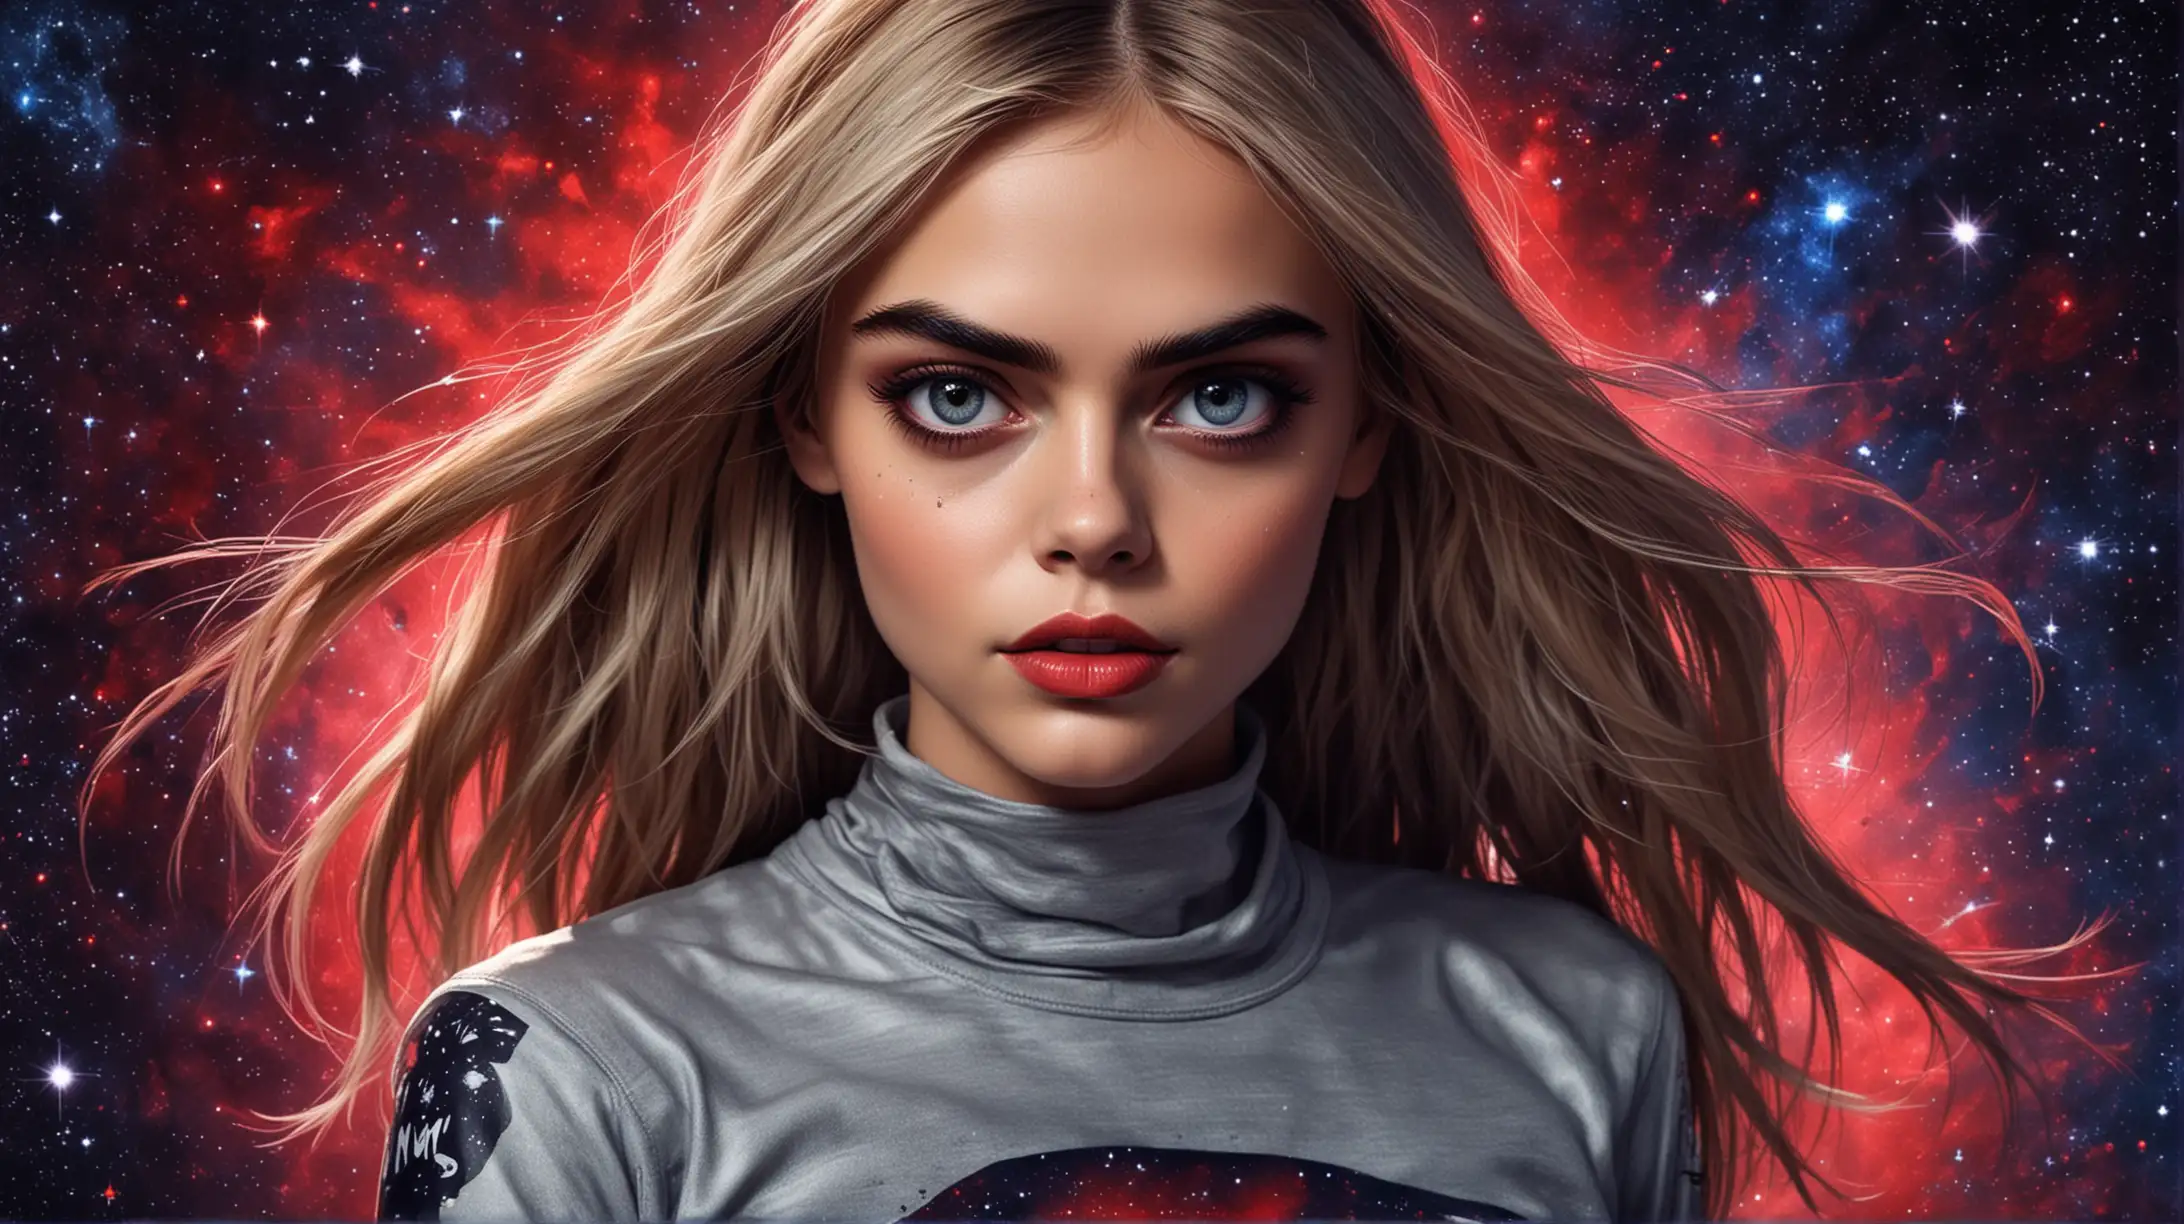 Cartoon Galactic Beauty Woman with Cosmic Background